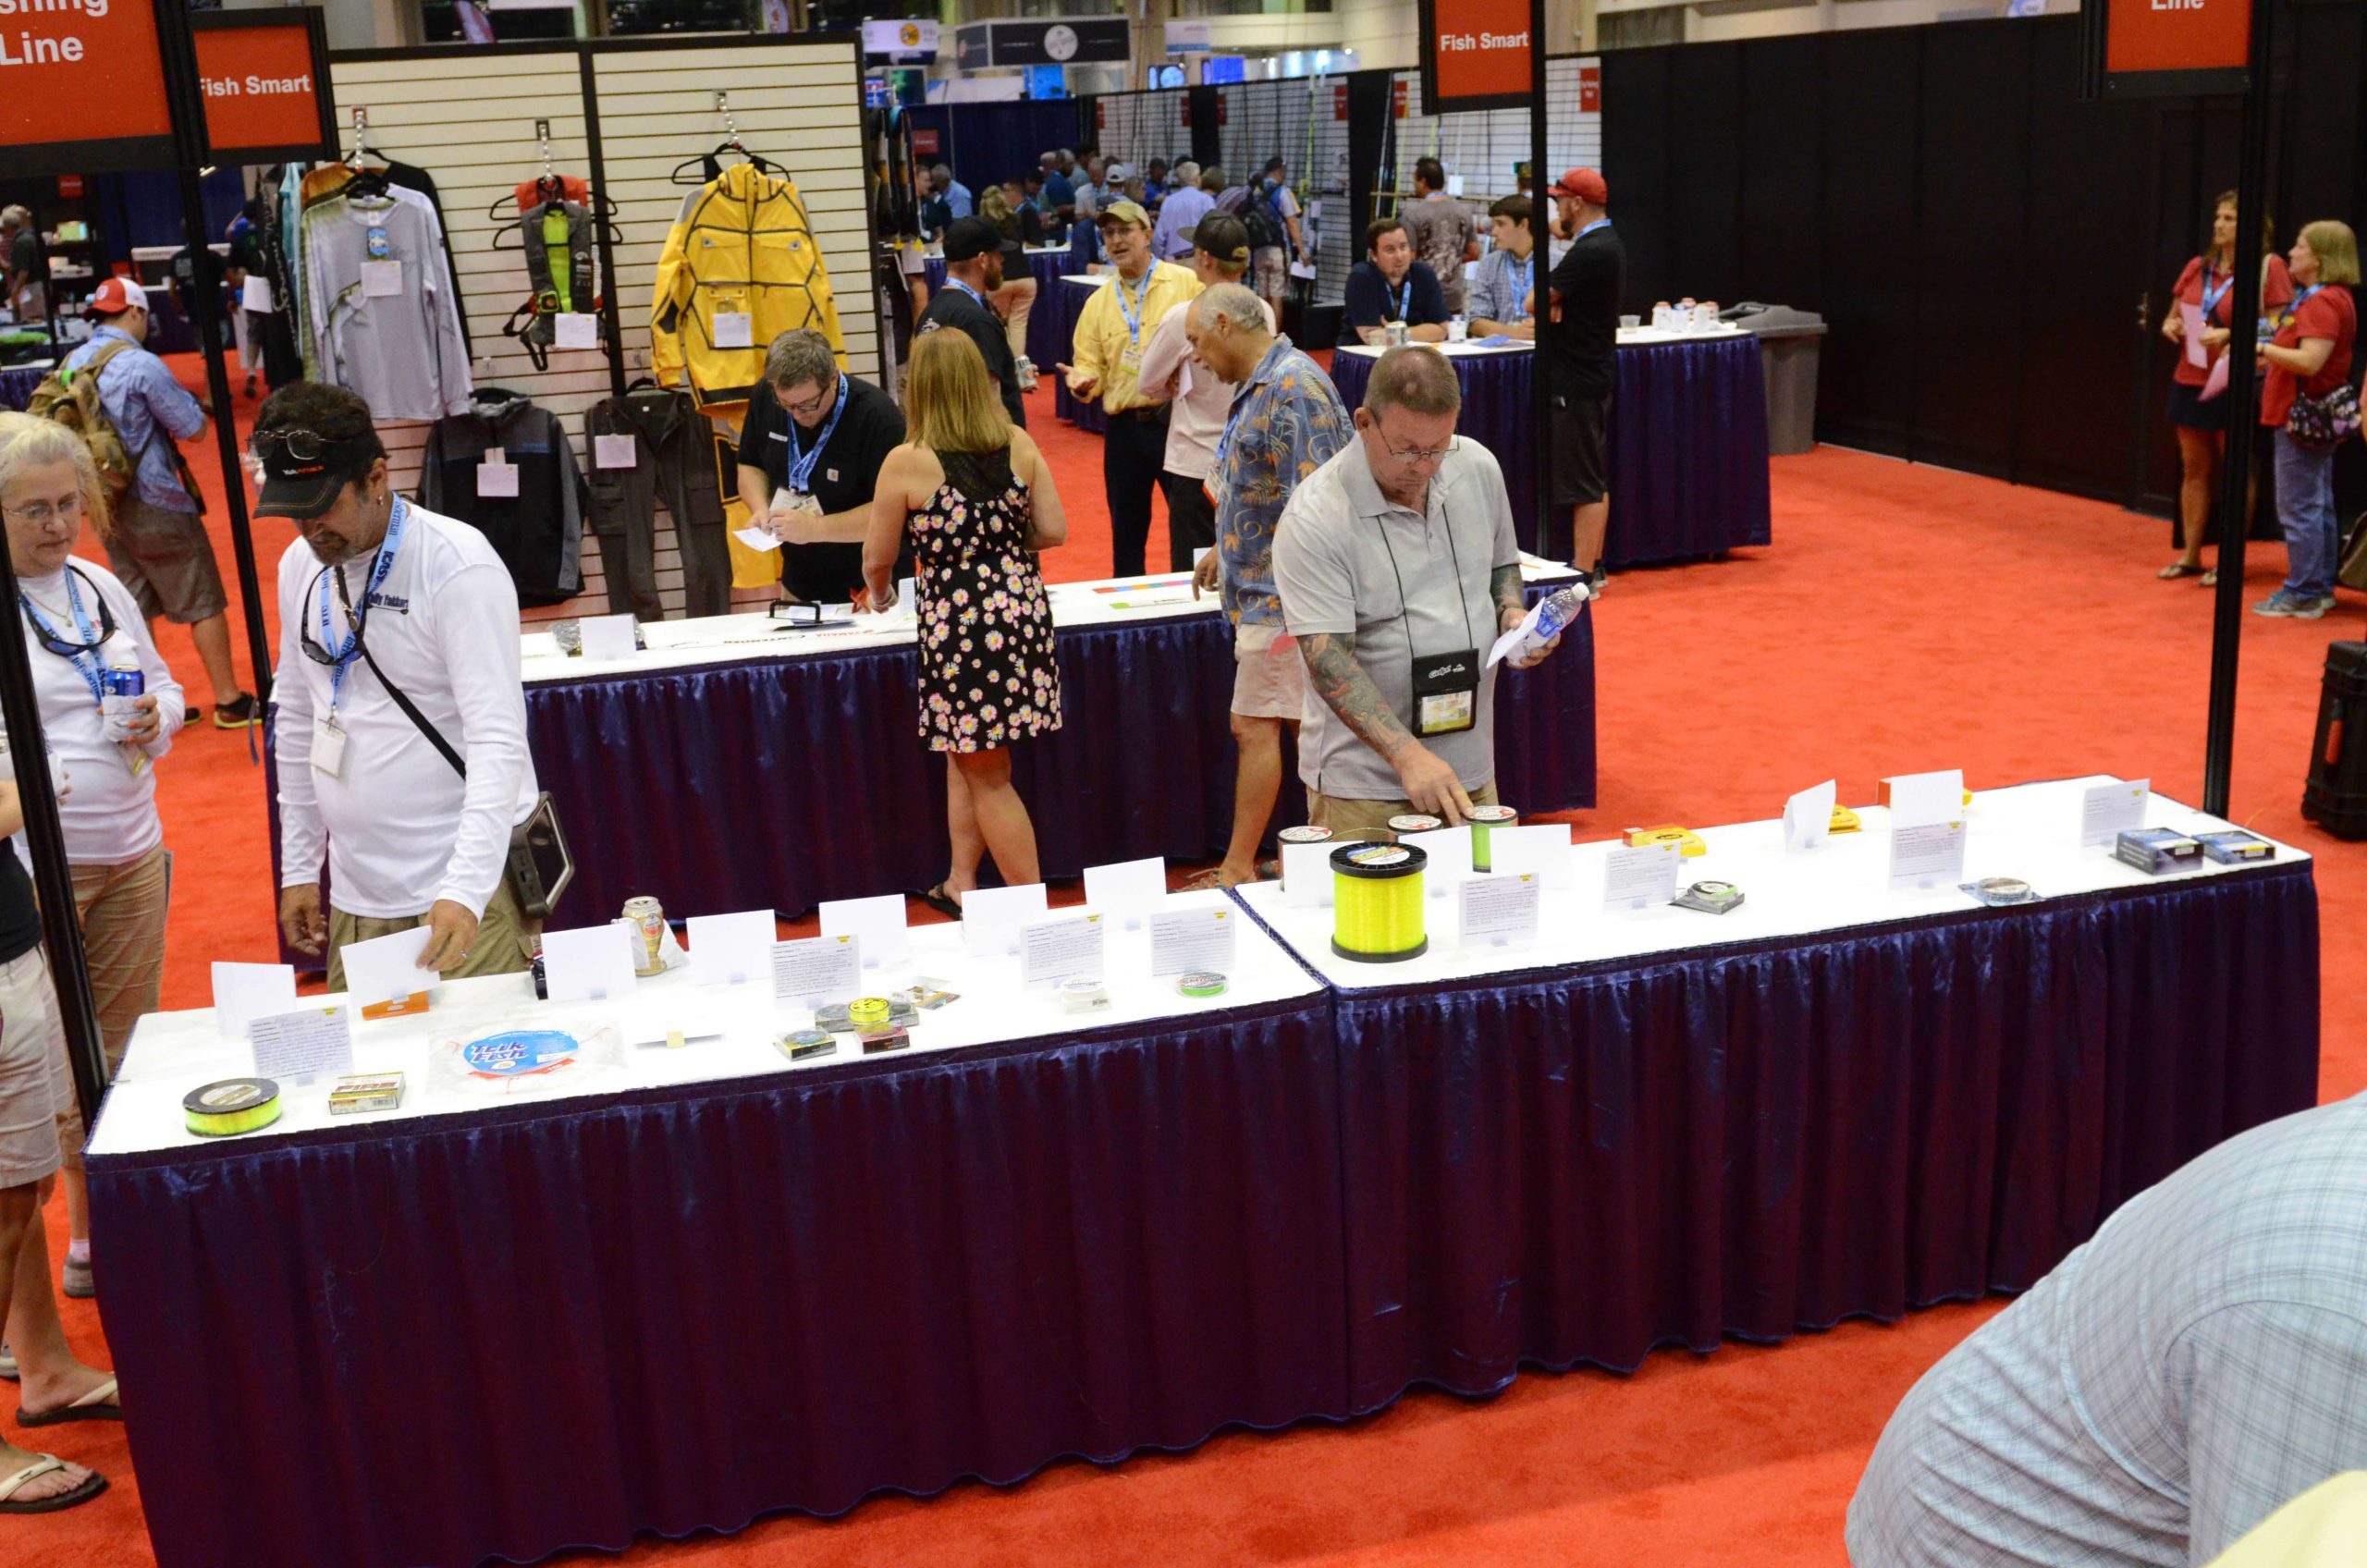 If you're looking to tie the lures on, a table of new line was part of the showcase as well.